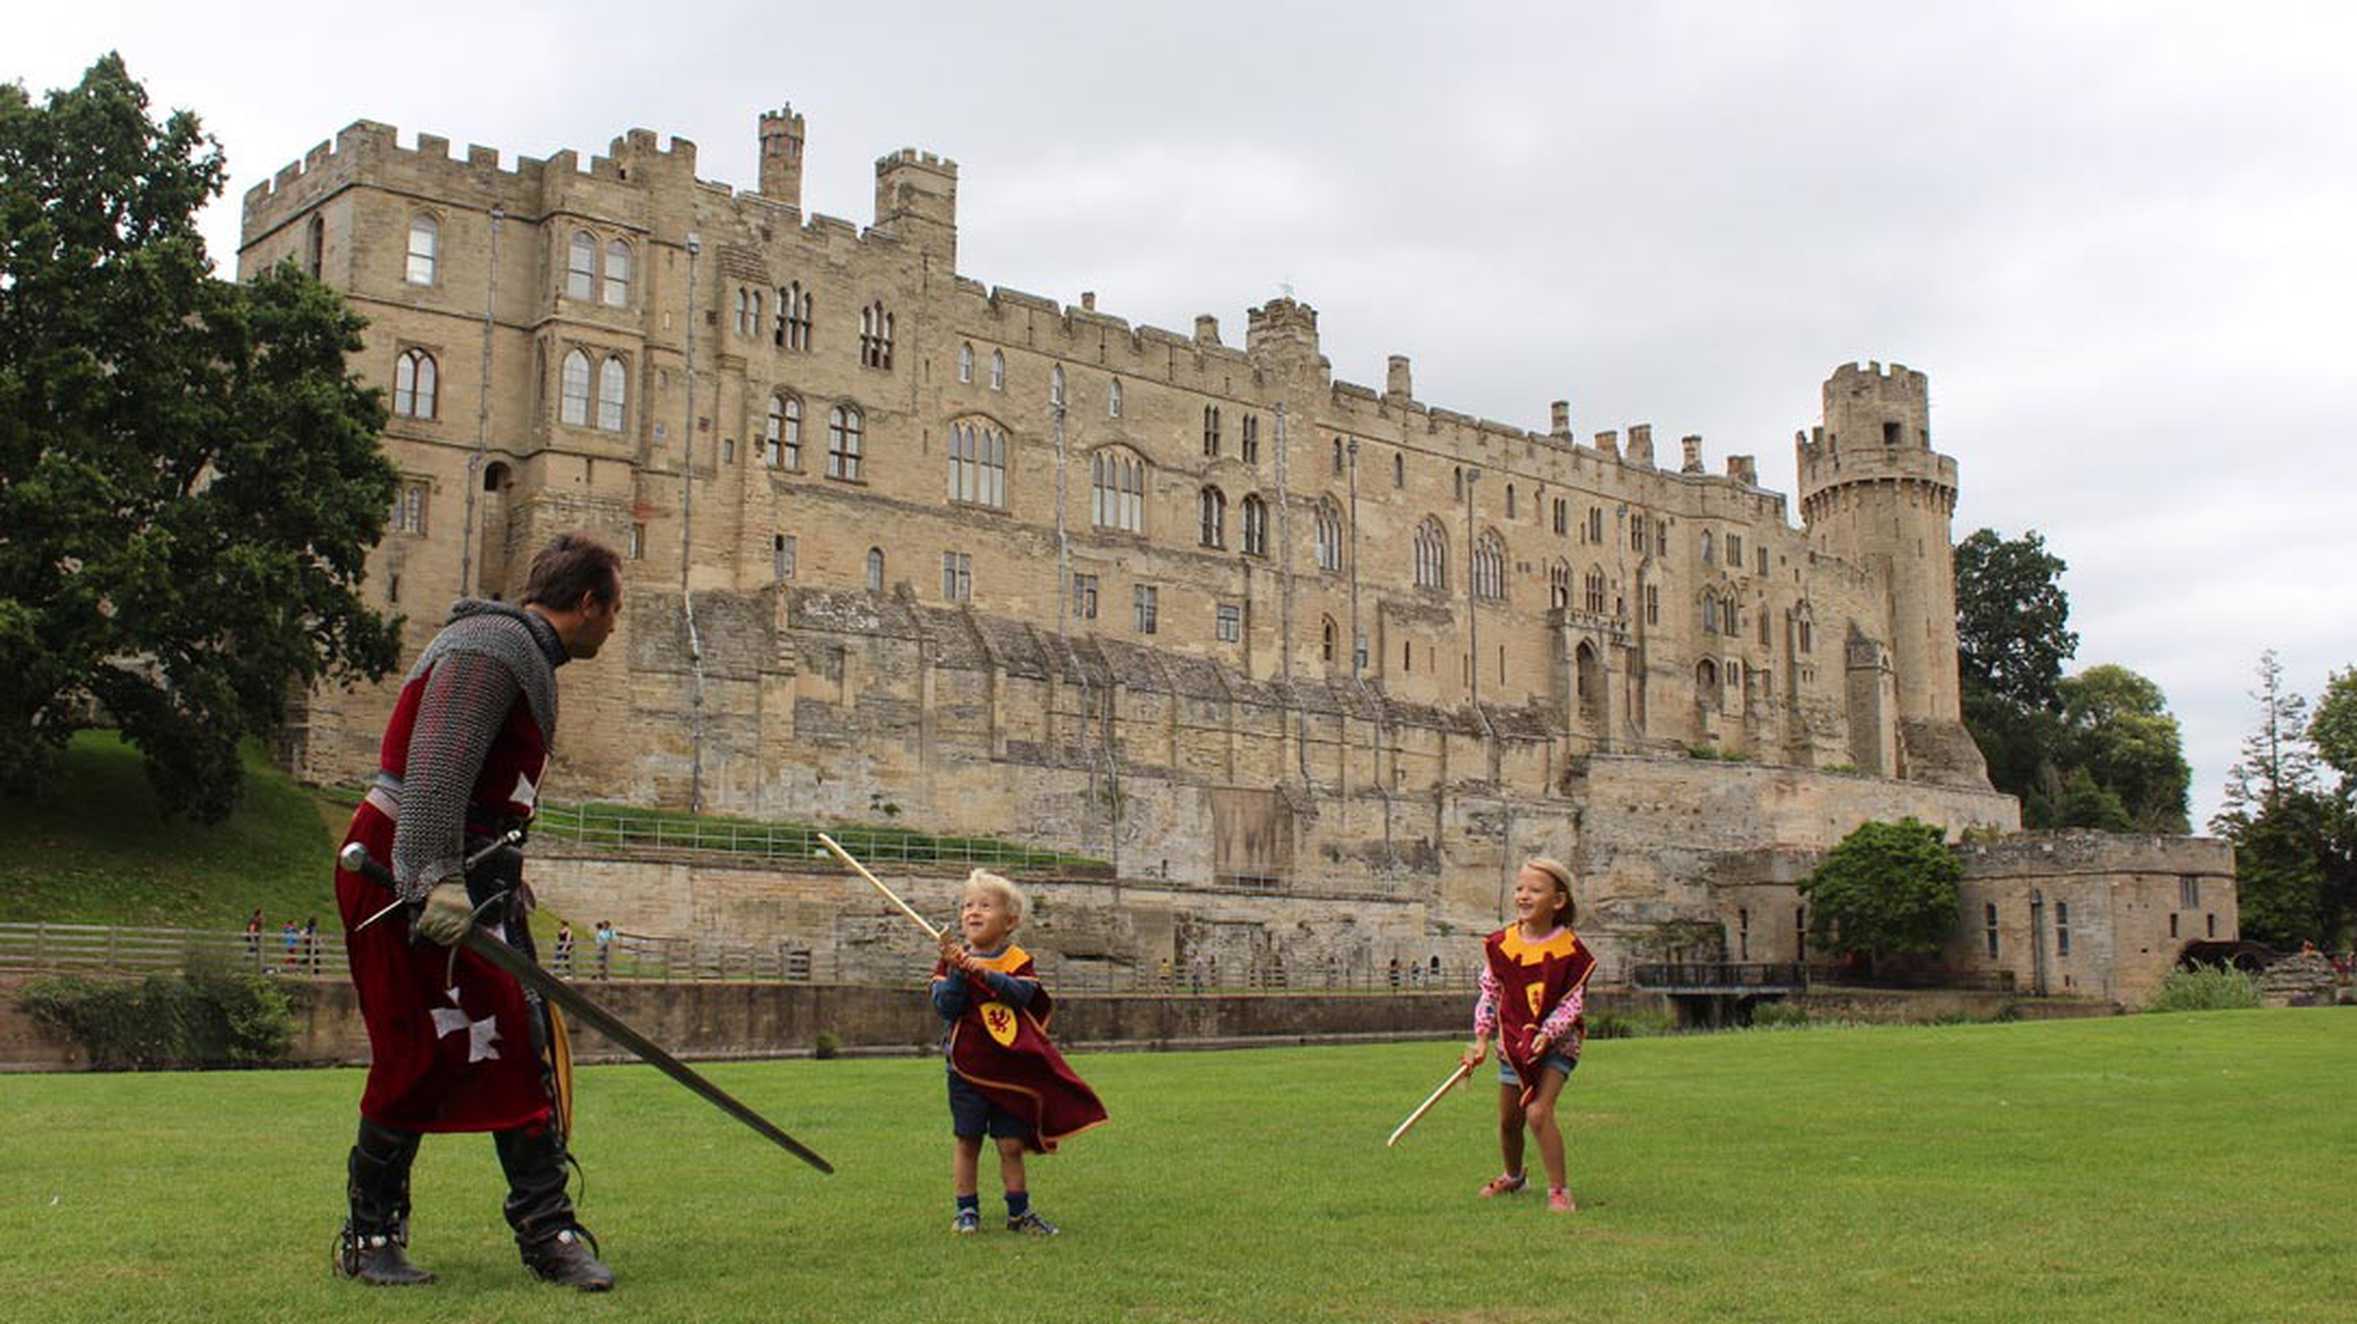 Hunor and his sister, Dorka fighting a knight with Warwick Castle in the background.